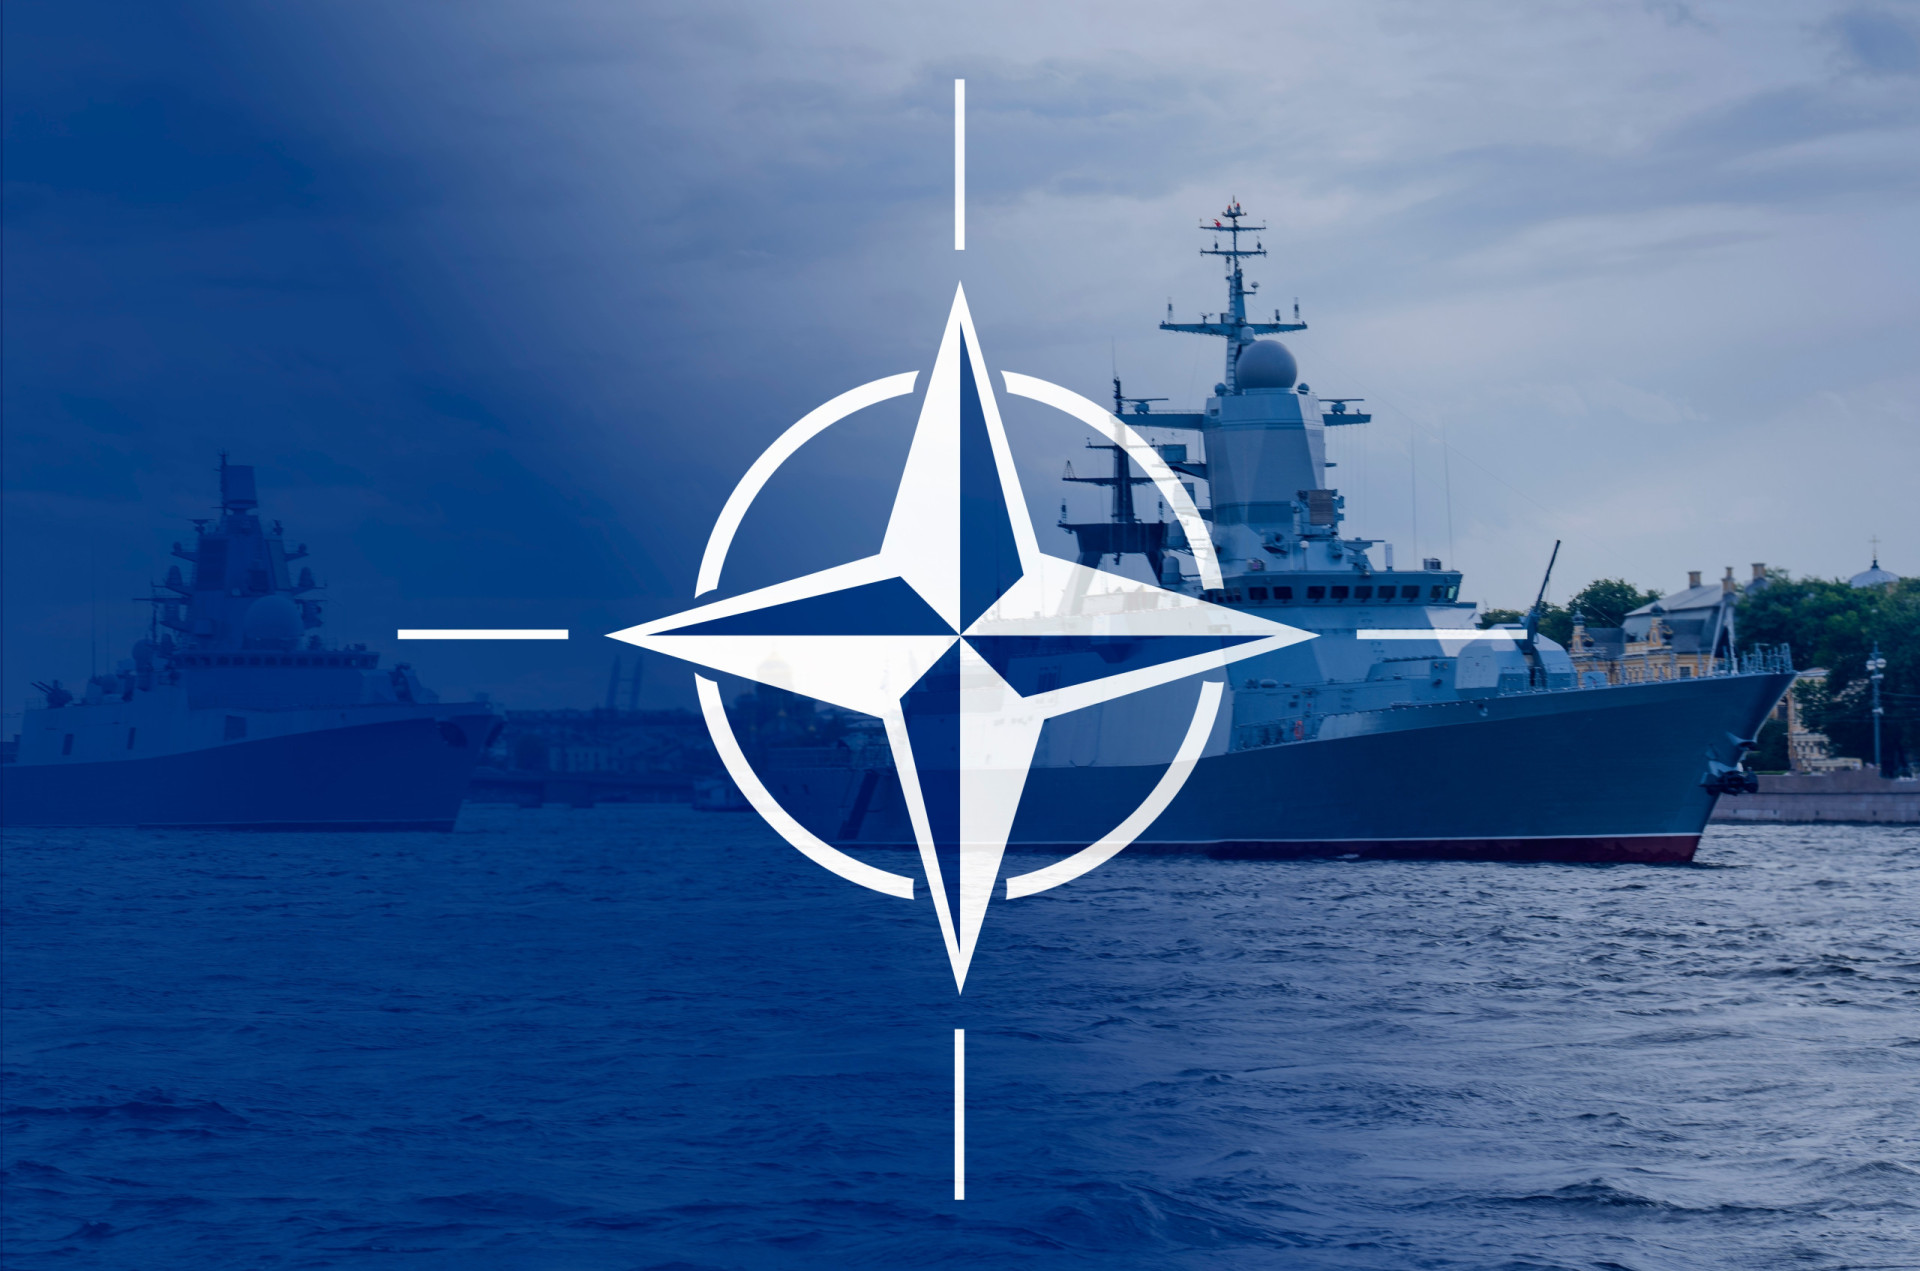 <p>NATO is the North Atlantic Treaty Organization. Founded in 1949, they work to protect the freedom and security of member countries in North America and Europe.</p>